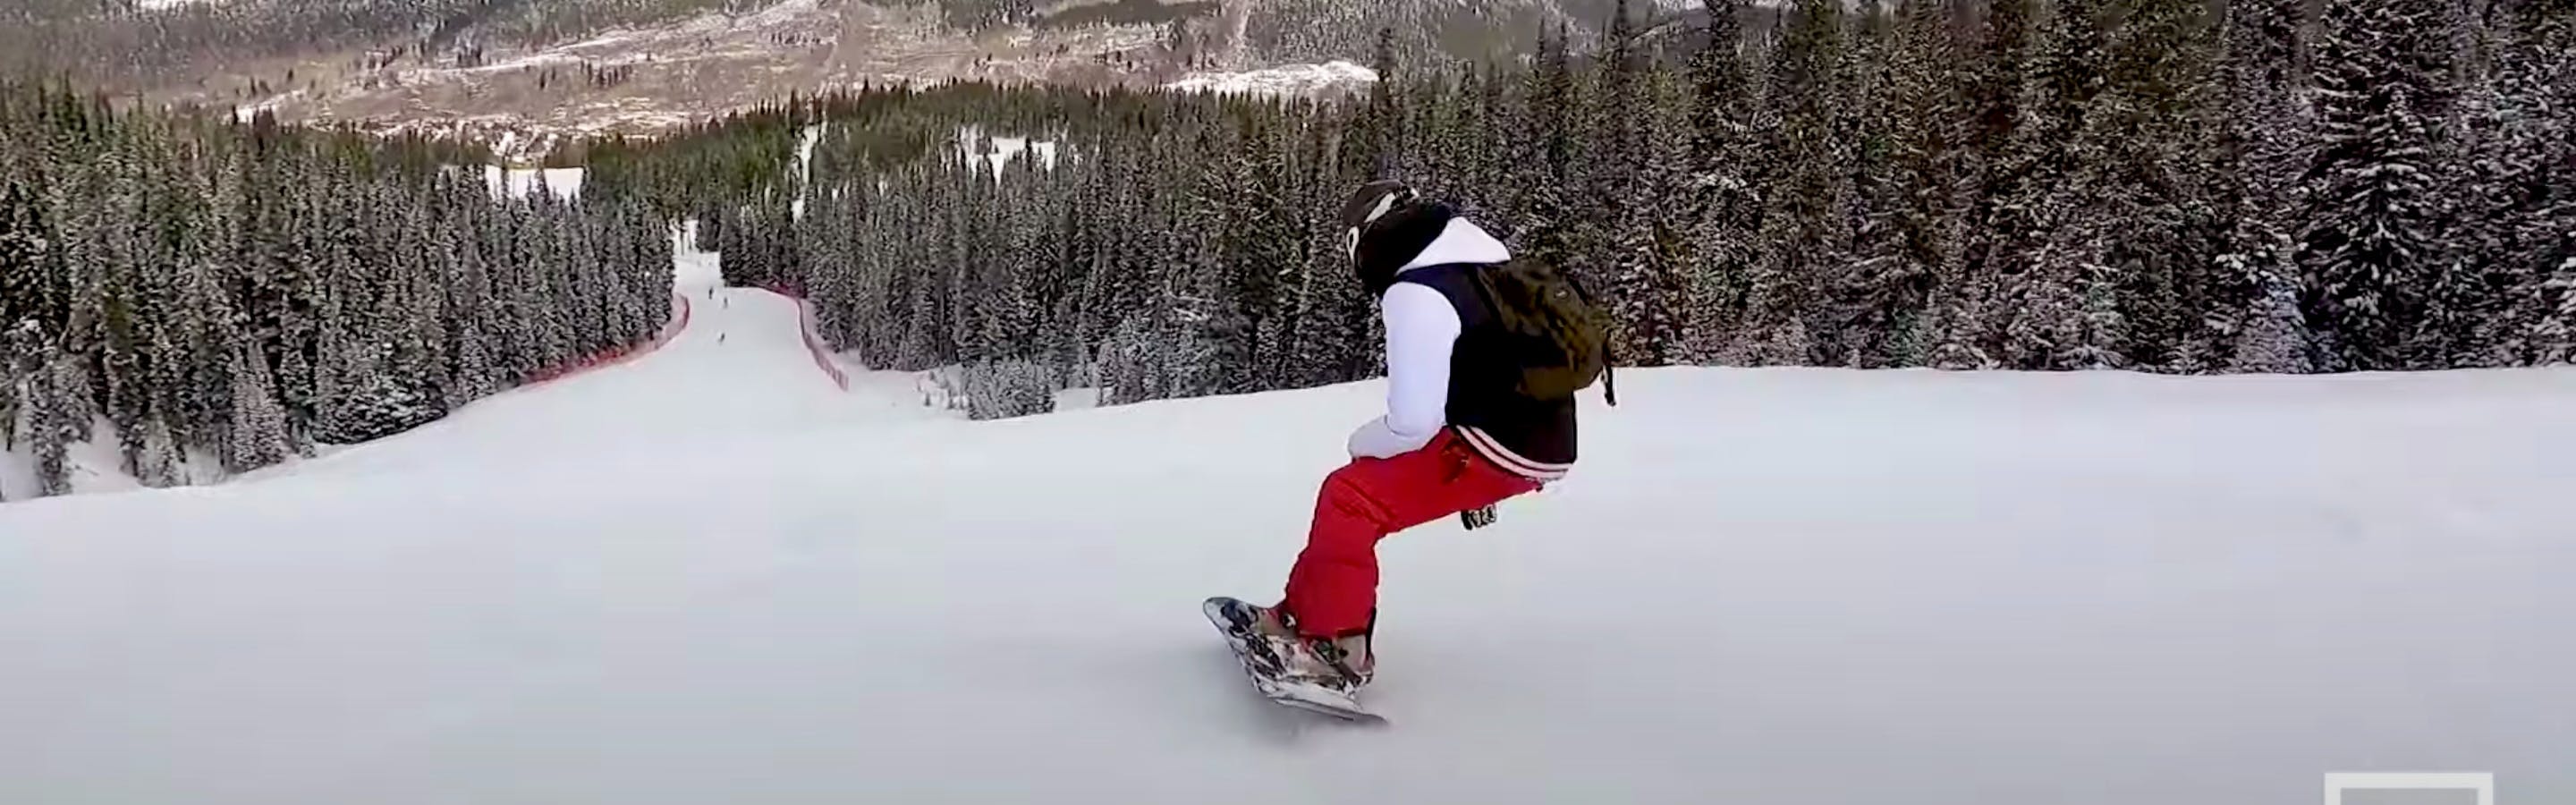 A screenshot from the YouTube video shows Frankie V. heading downhill on the board while wearing red pants. 